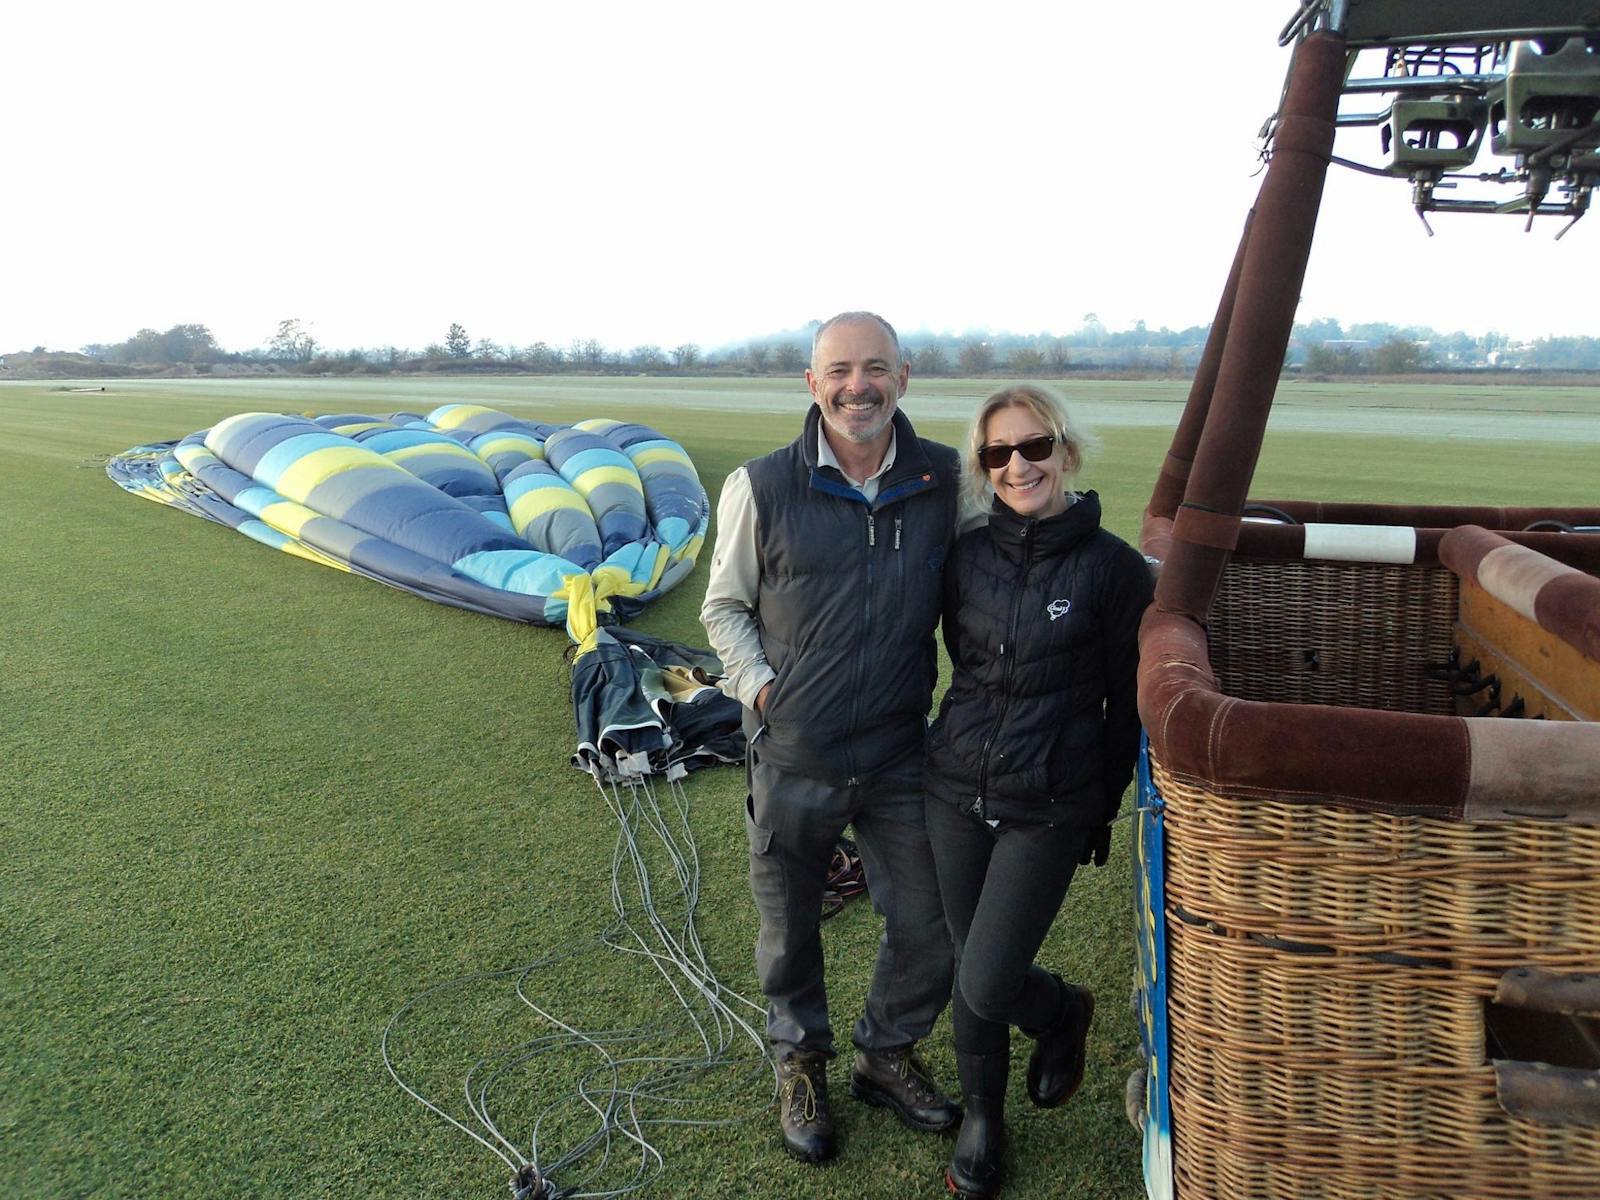 Over 30 years experience in operating hot air balloons ensuring you have a fun, safe flight!